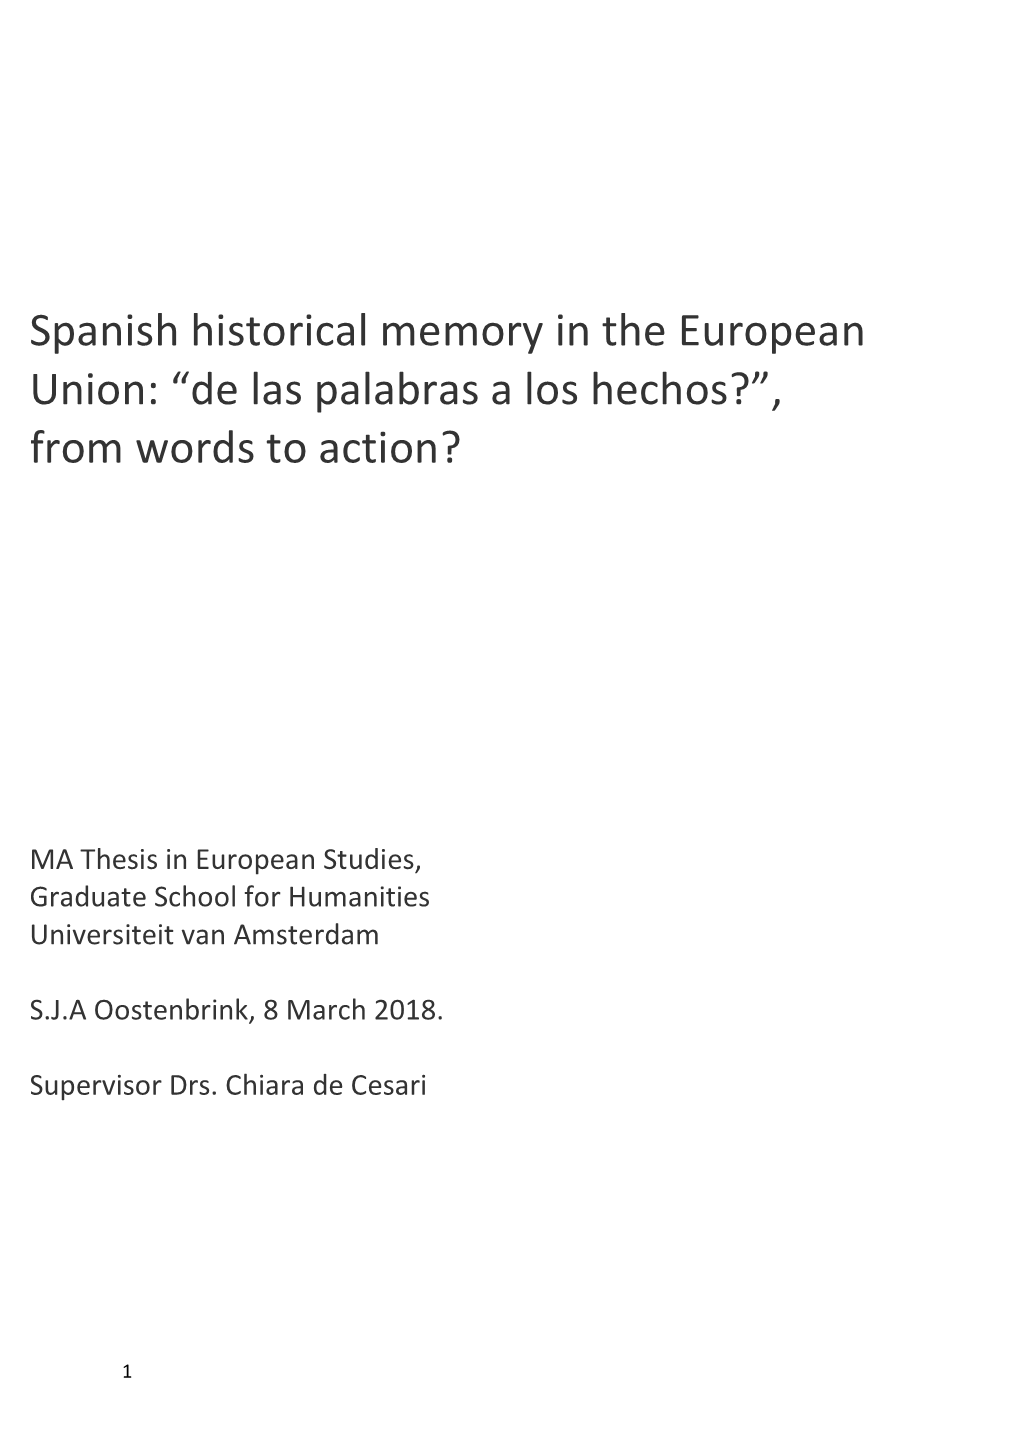 Spanish Historical Memory in the European Union: “De Las Palabras a Los Hechos?”, from Words to Action?